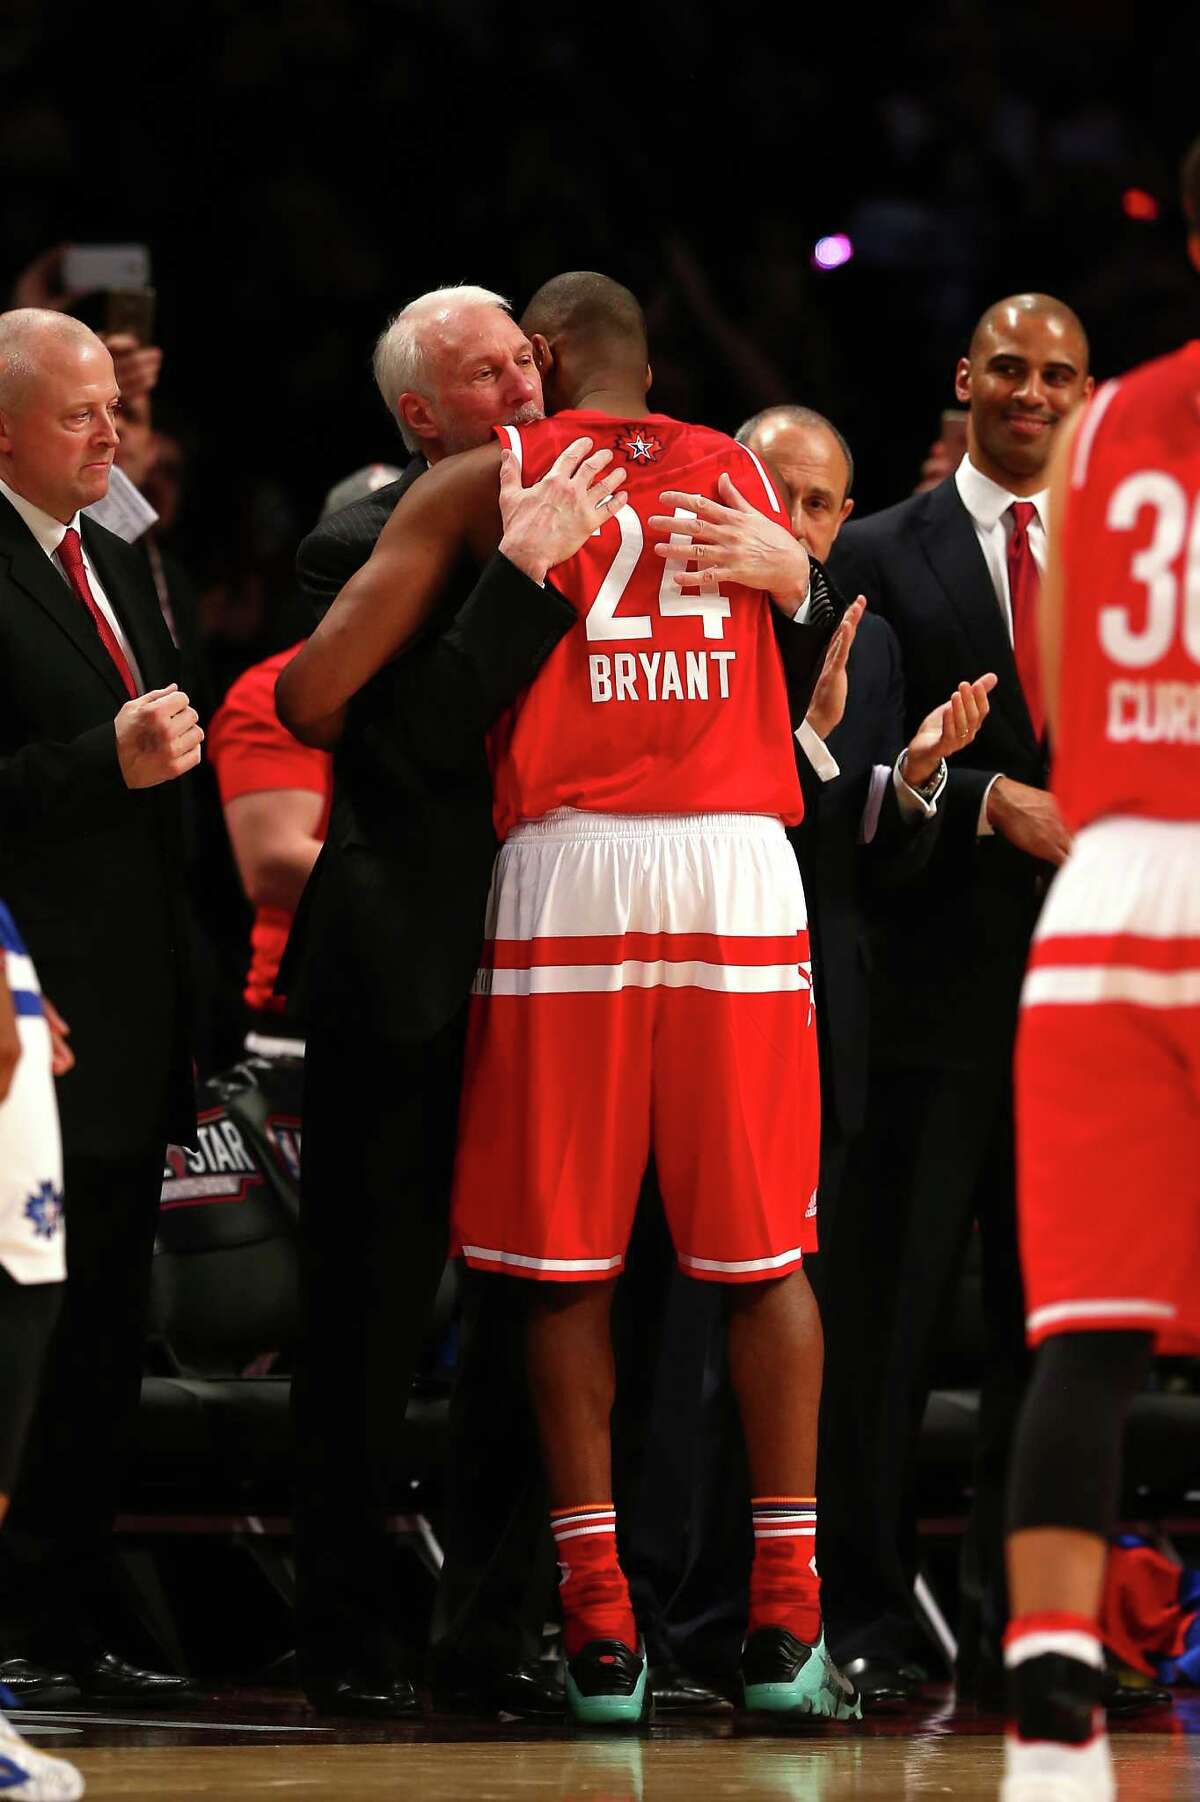 TORONTO, ON - FEBRUARY 14: Kobe Bryant #24 of the Los Angeles Lakers and the Western Conference hugs head coach Gregg Popovich as he walks to the bench in the fourth quarter against the Eastern Conference during the NBA All-Star Game 2016 at the Air Canada Centre on February 14, 2016 in Toronto, Ontario. NOTE TO USER: User expressly acknowledges and agrees that, by downloading and/or using this Photograph, user is consenting to the terms and conditions of the Getty Images License Agreement.